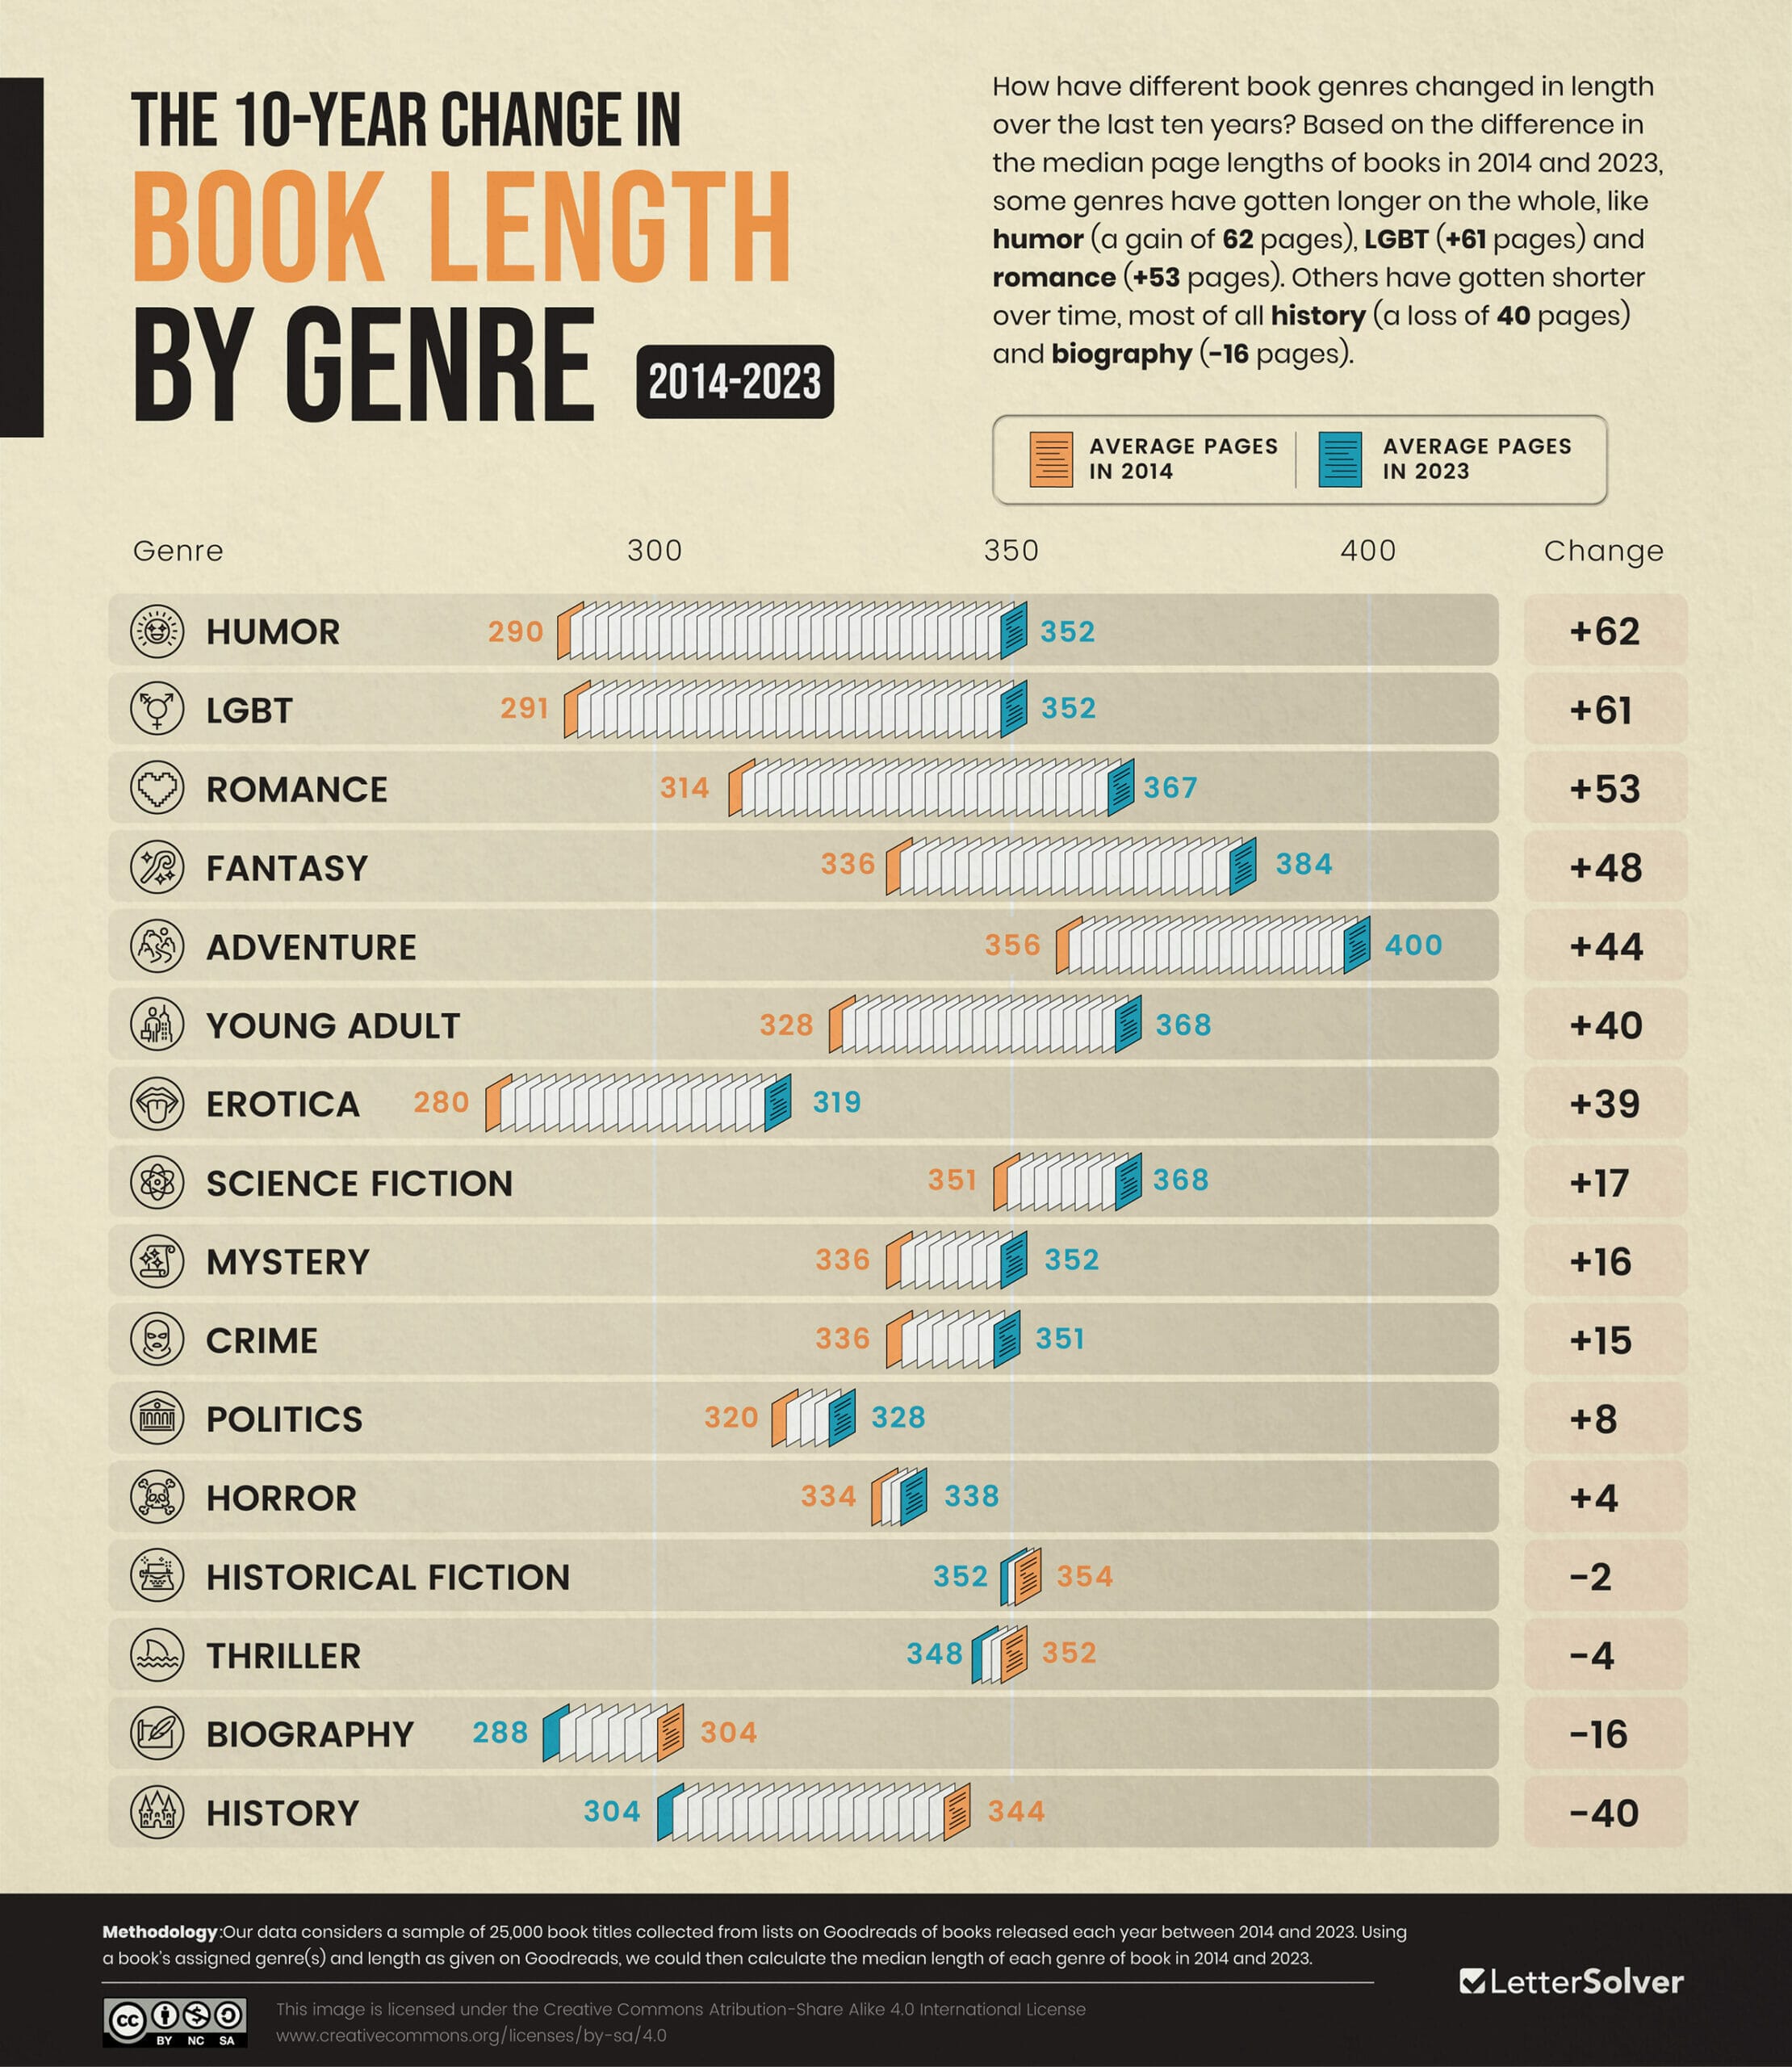 The page count of books by genre